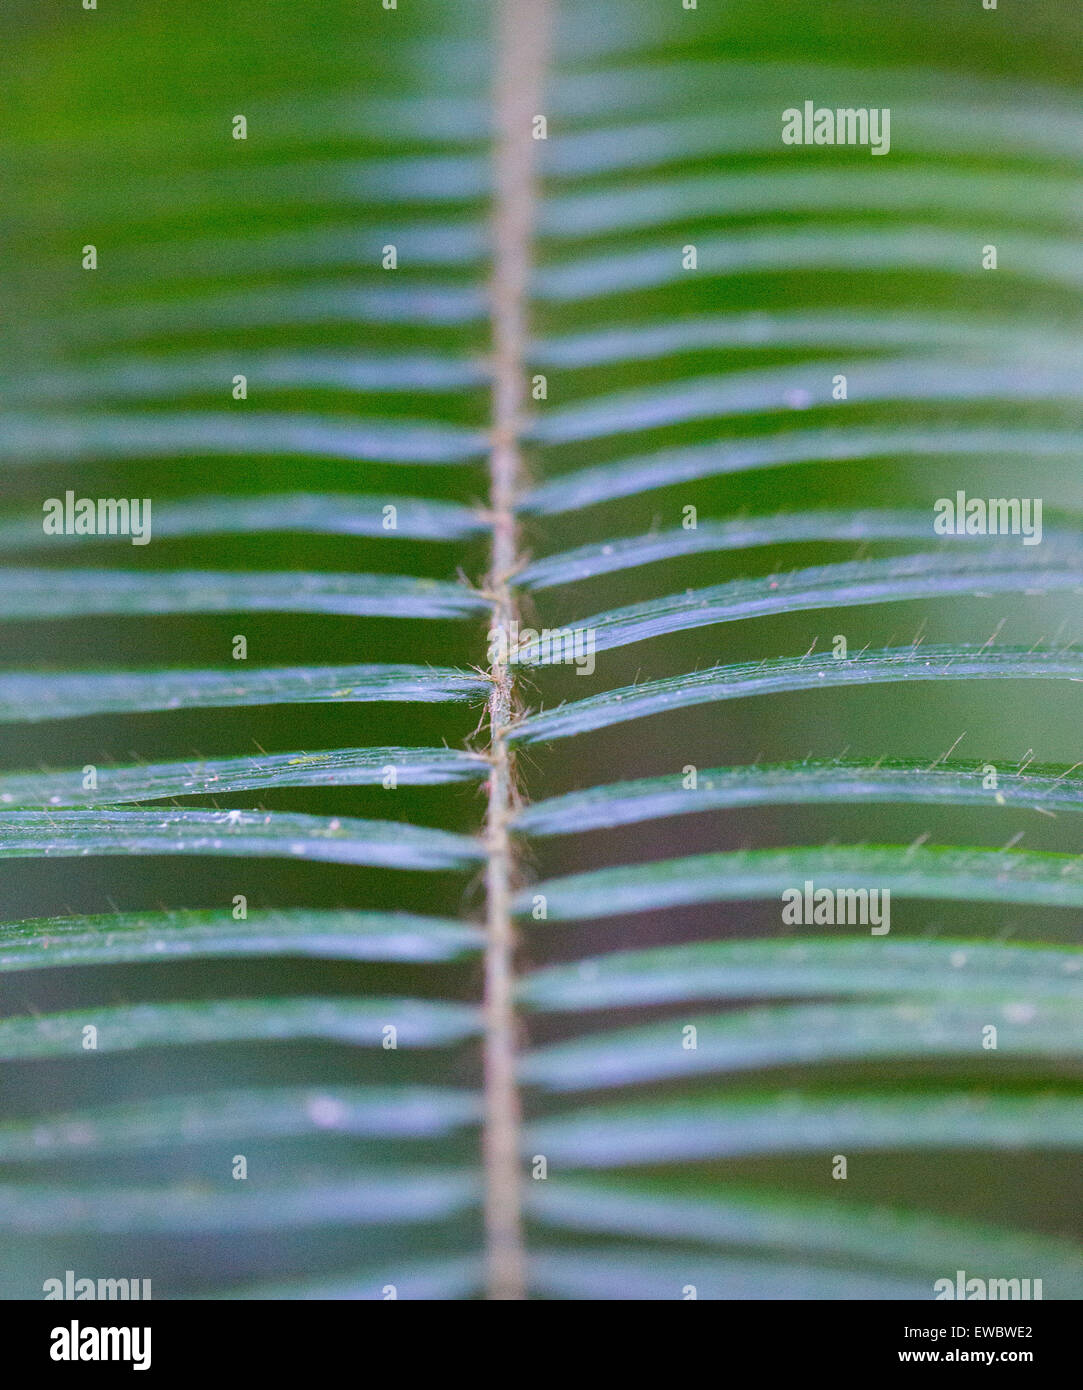 Detail of palm foliage with tiny hair-like spines on each leaf, Taman Negara, Malaysia Stock Photo